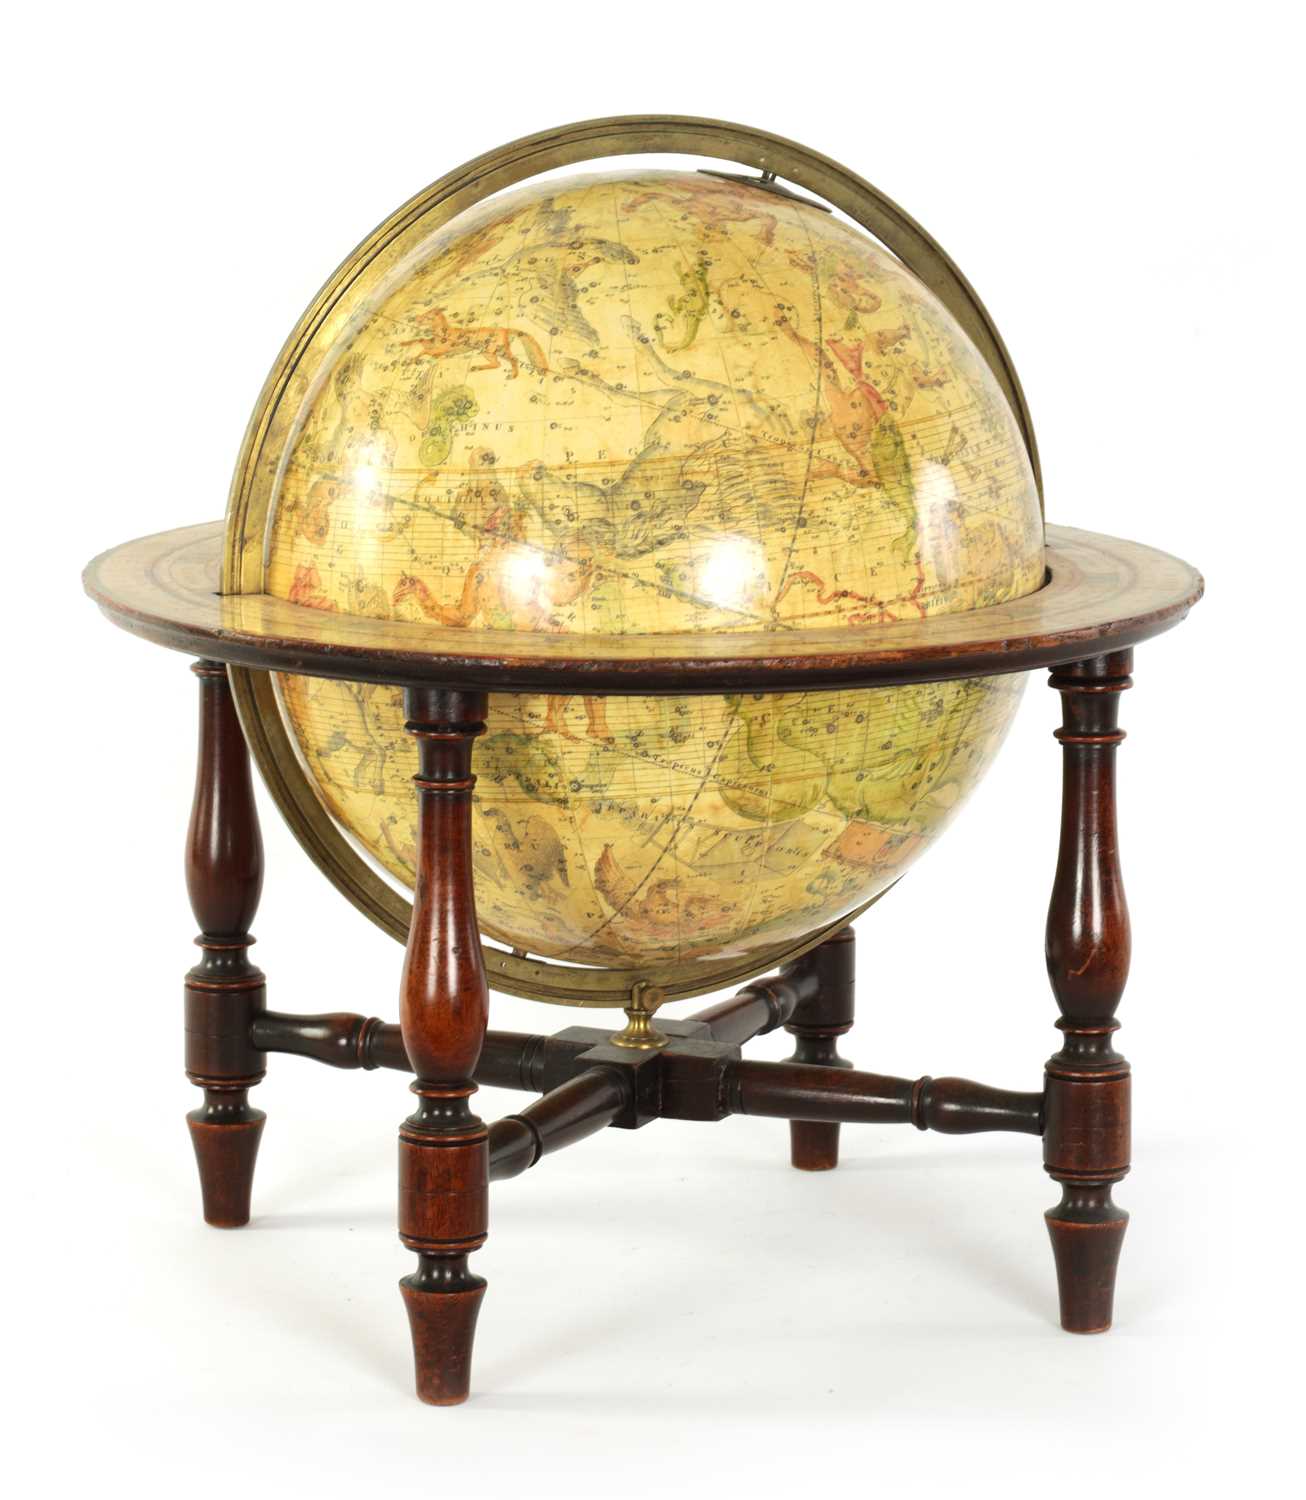 Lot 613 - A 19TH CENTURY 12” CARY’S NEW CELESTIAL GLOBE ON STAND